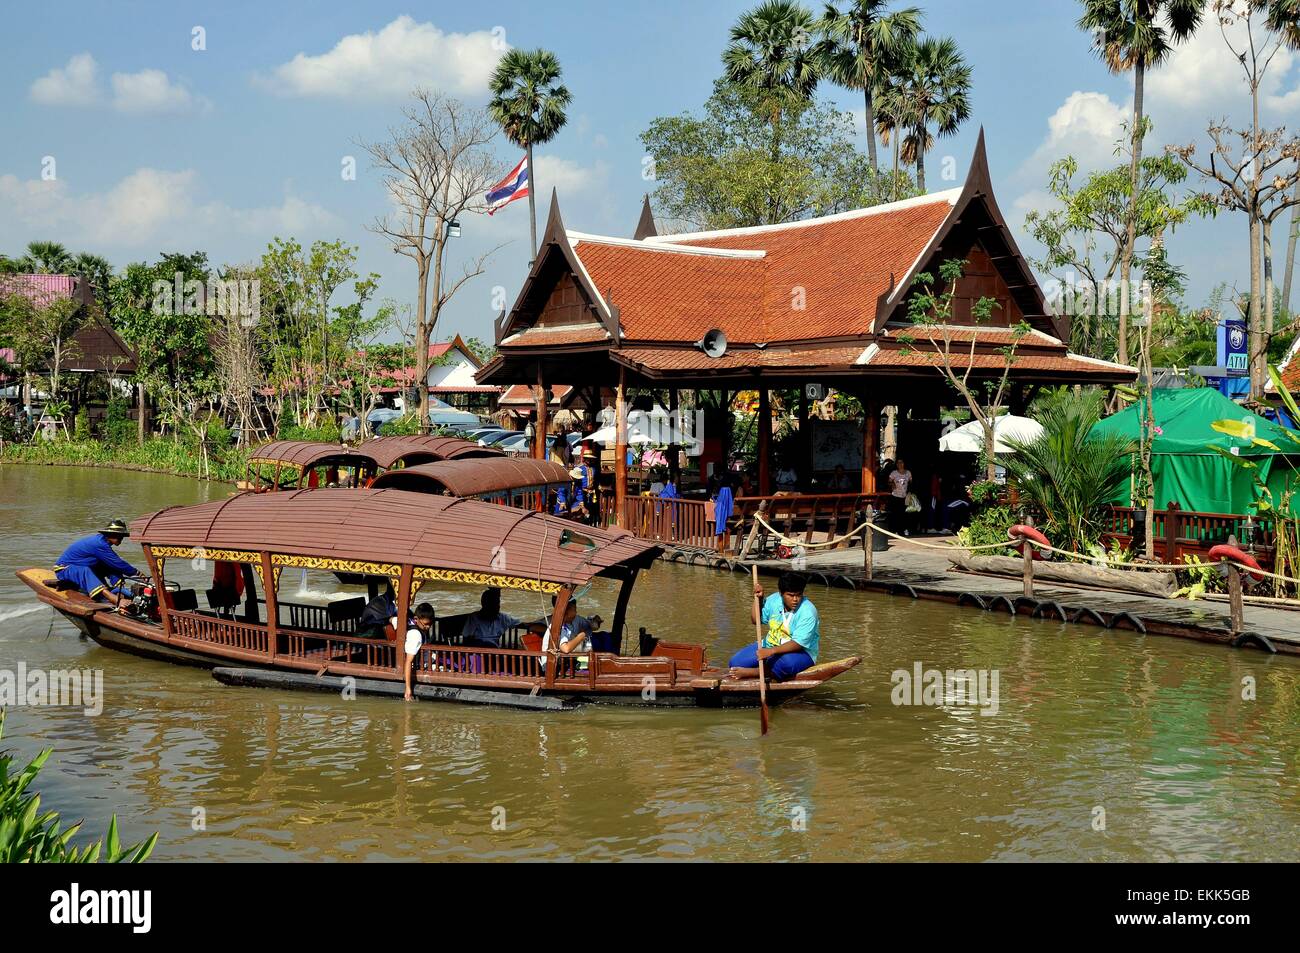 Ayutthaya, Thailand:  Boatmen fore and aft guiding a wooden touring boat along a klong (canal) at the Ayutthaya Floating Market Stock Photo